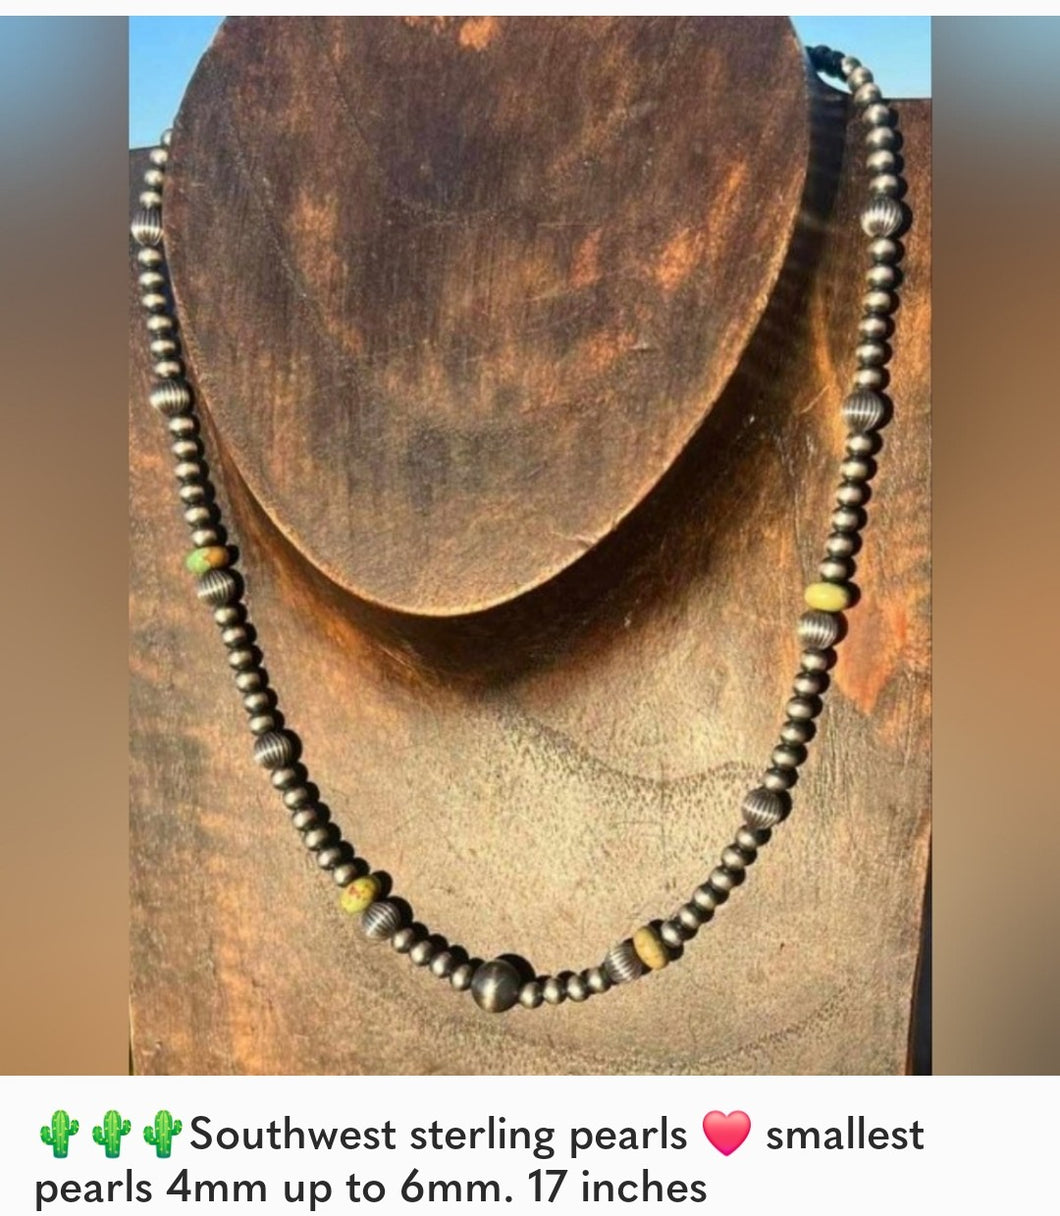 Southwest Navajo sterling pearls ❤️ smallest pearls 4mm up to 6mm. 17 inches